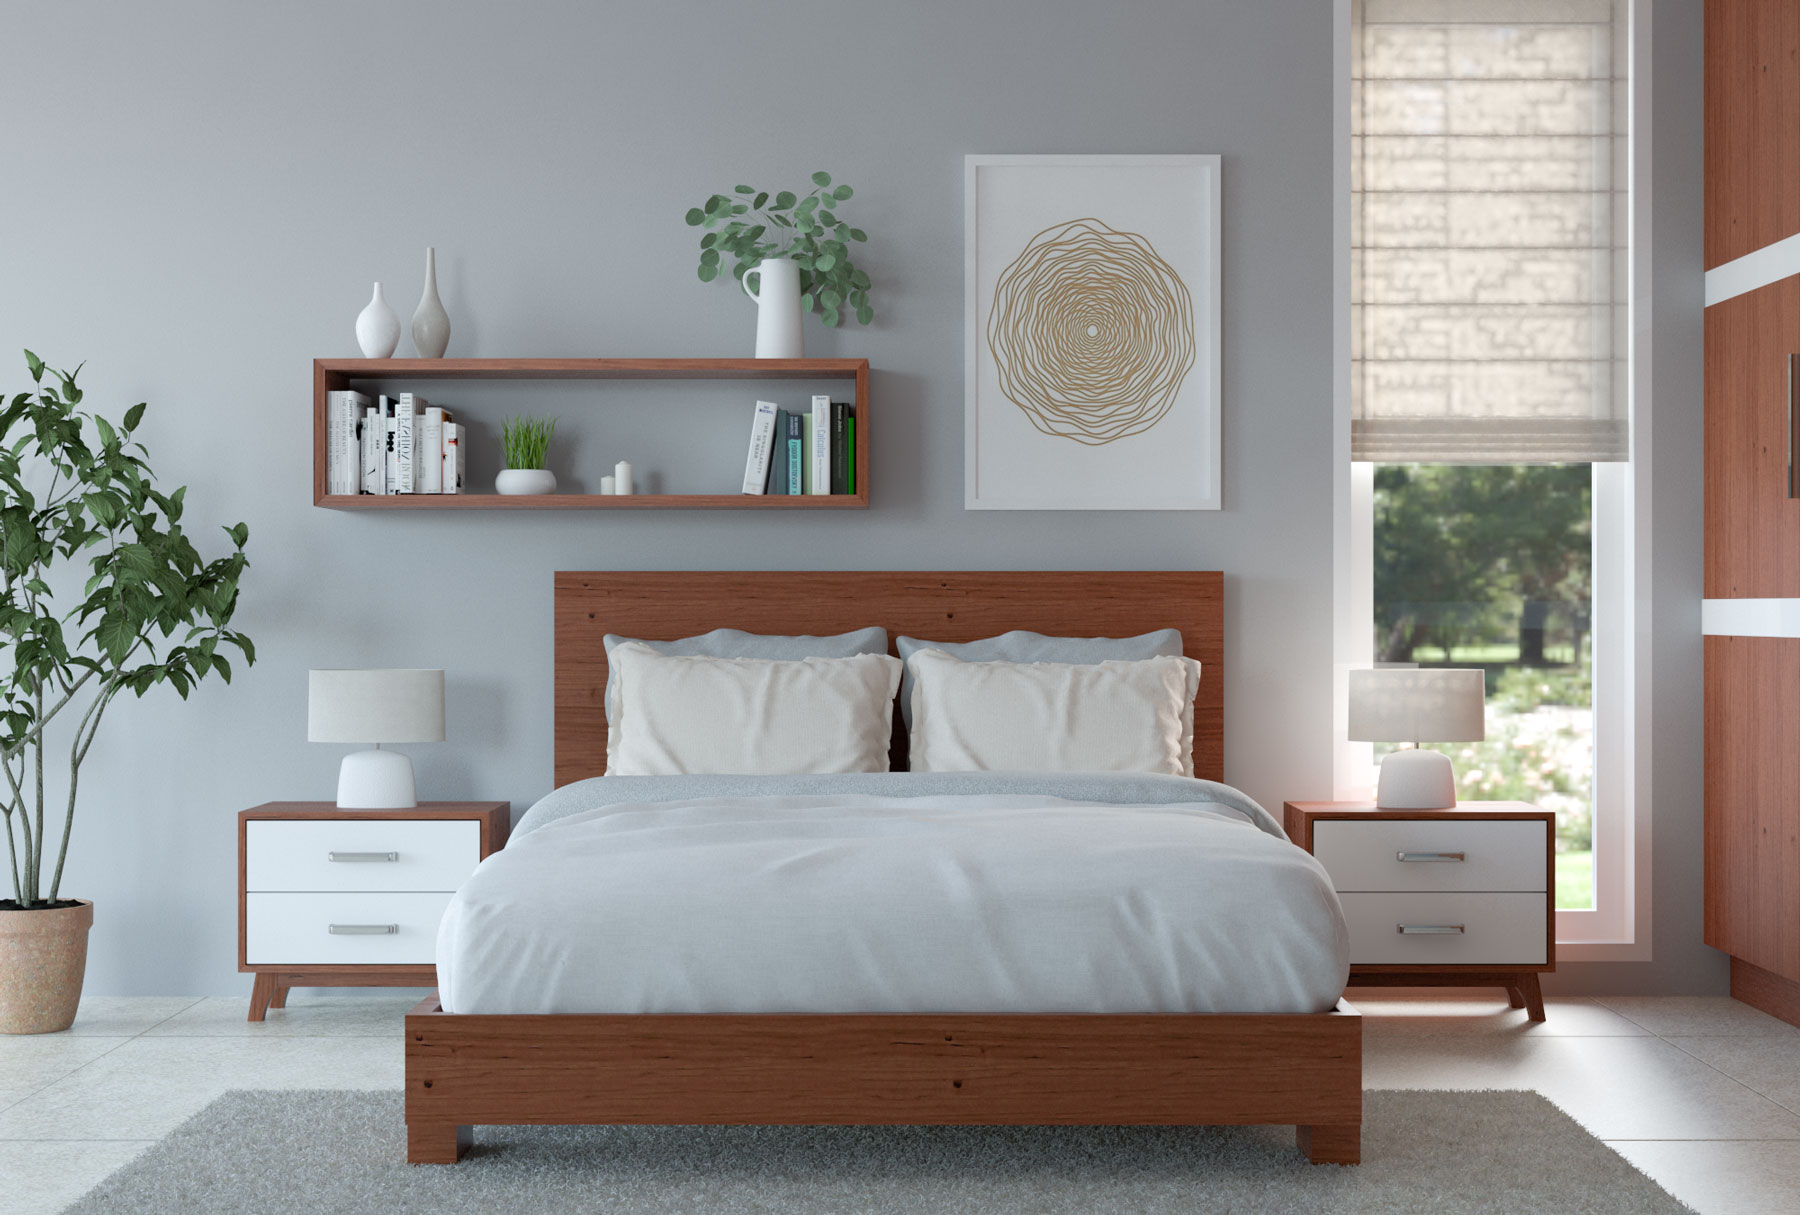 What Colors Go With Cherry Wood Bedroom Furniture